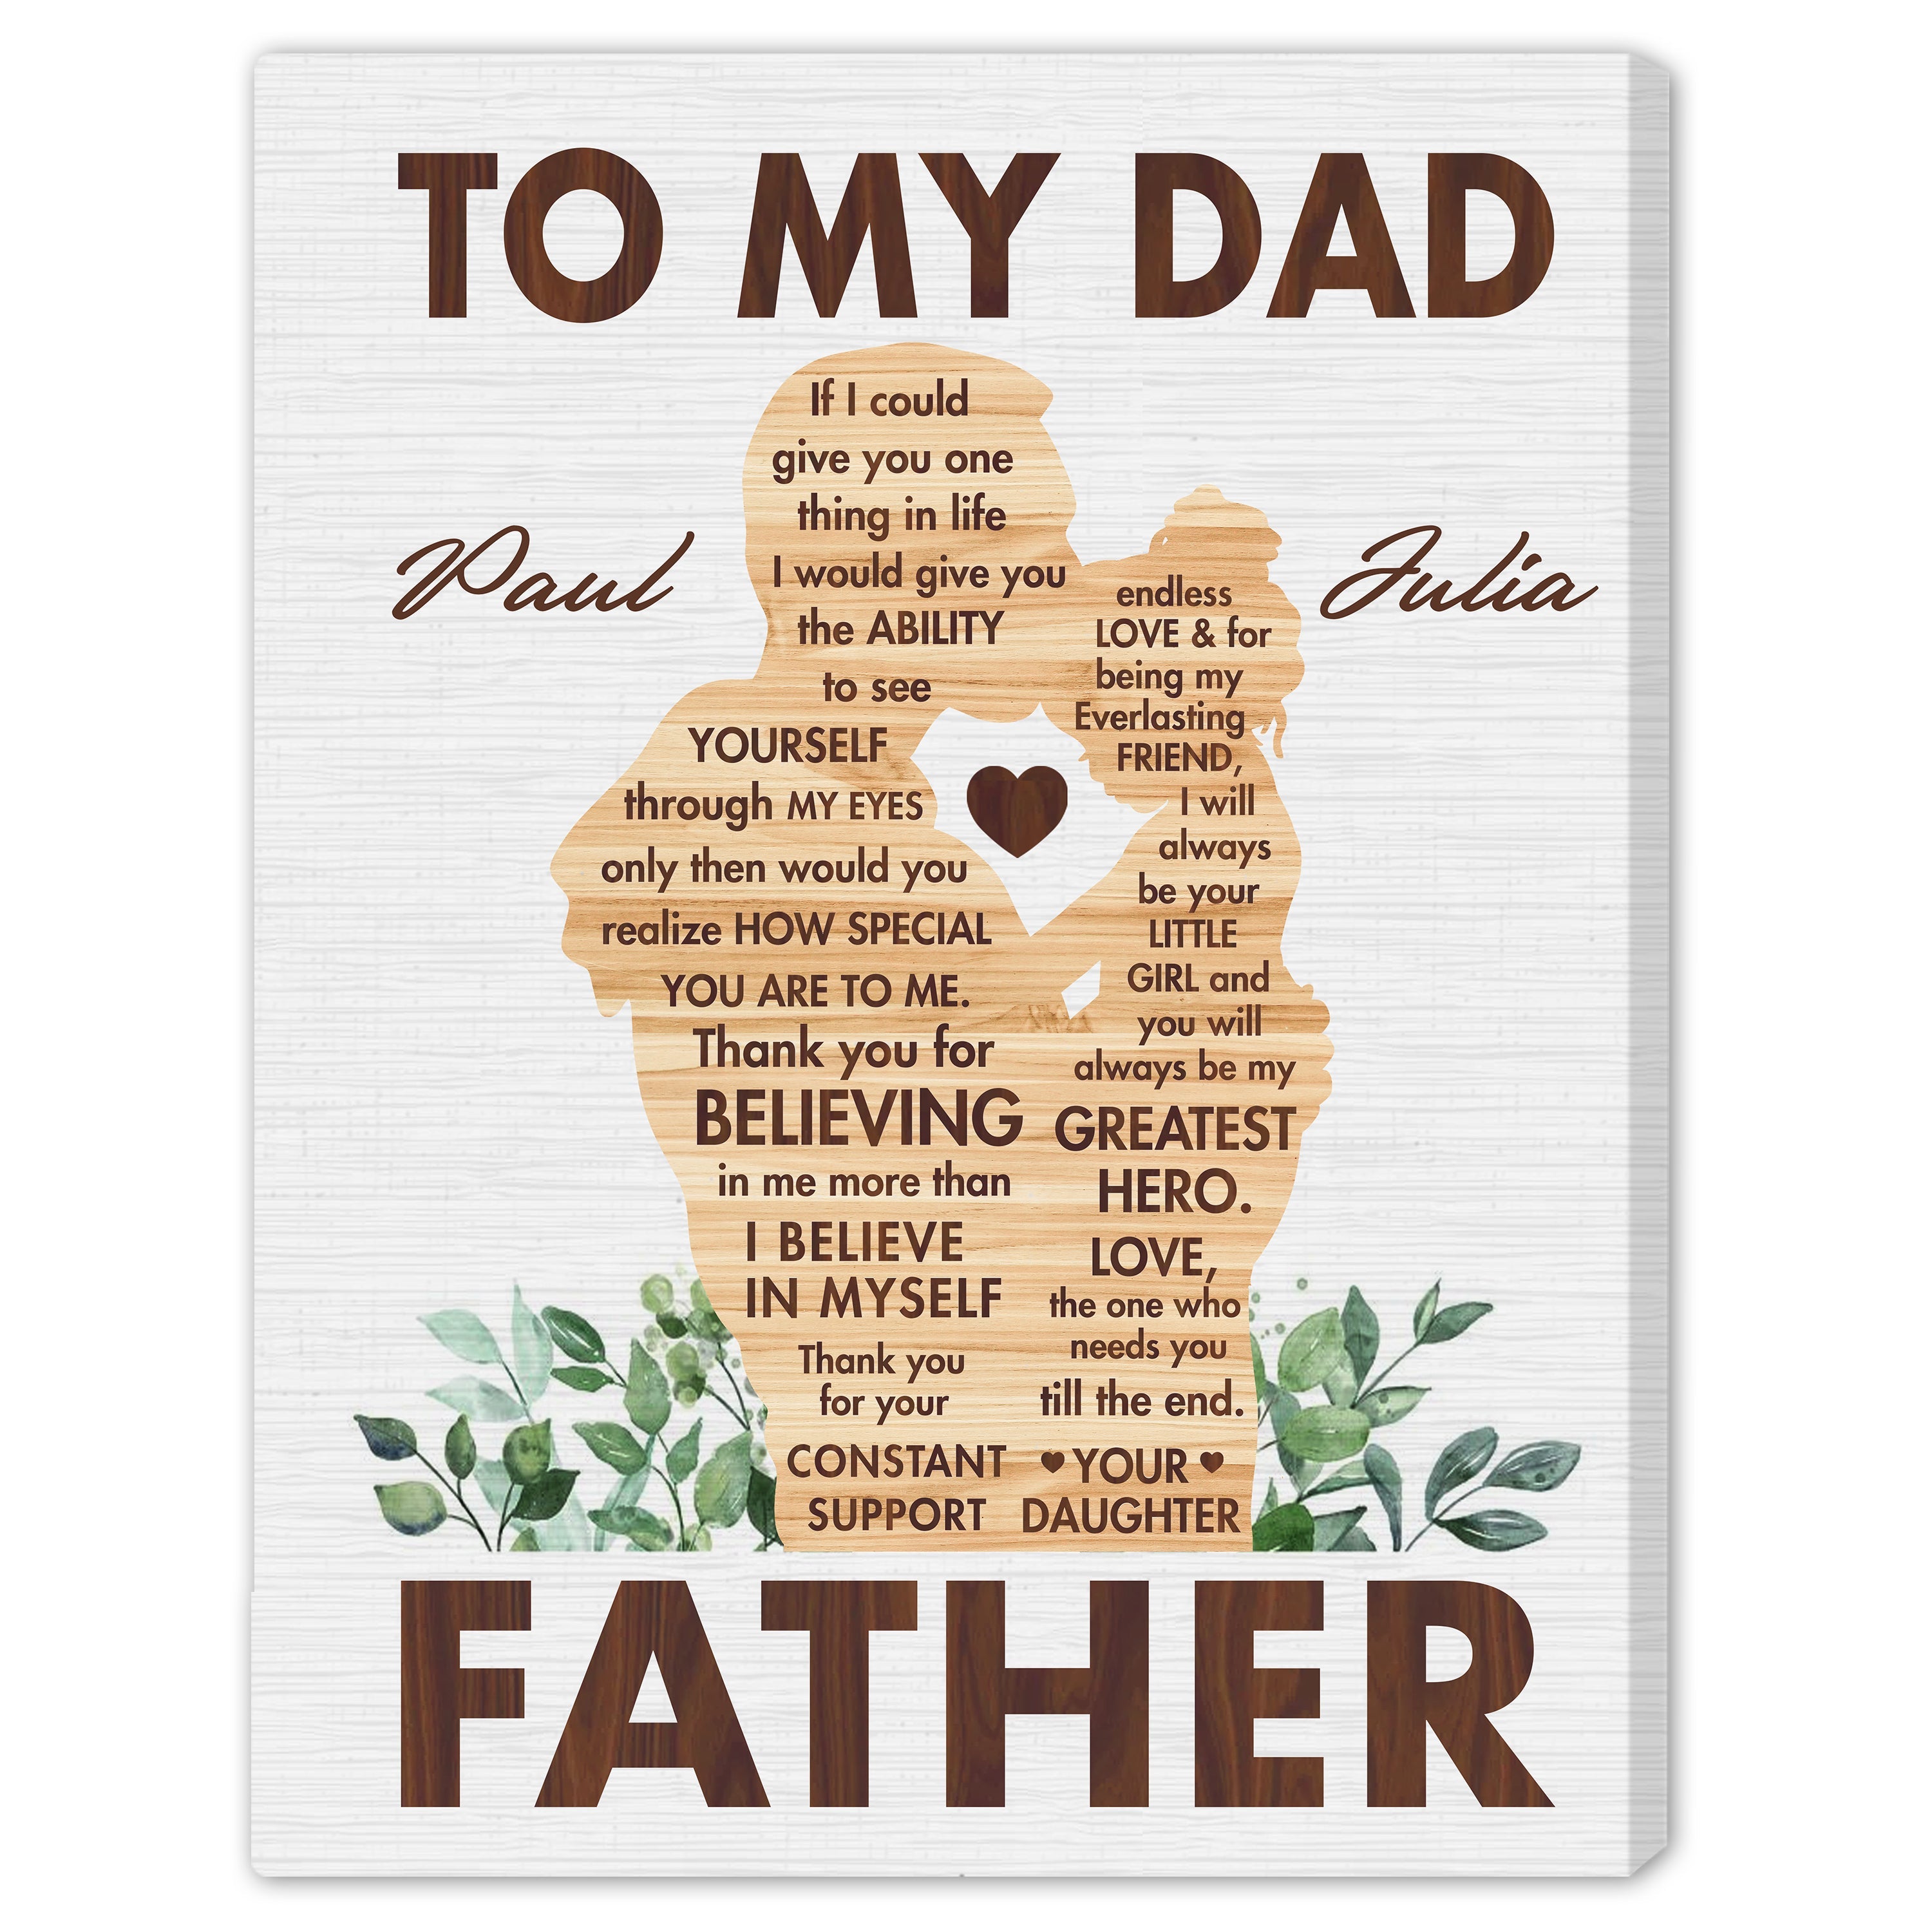 Indigifts Decorative Gift Items Gift for Papa, Fathers Birthday Gift, Dad  Gift, Gifts for Parents, Anniversary Gifts for Mom Dad, I Love You Dad  Quote Ceramic Coffee Mug Price in India -